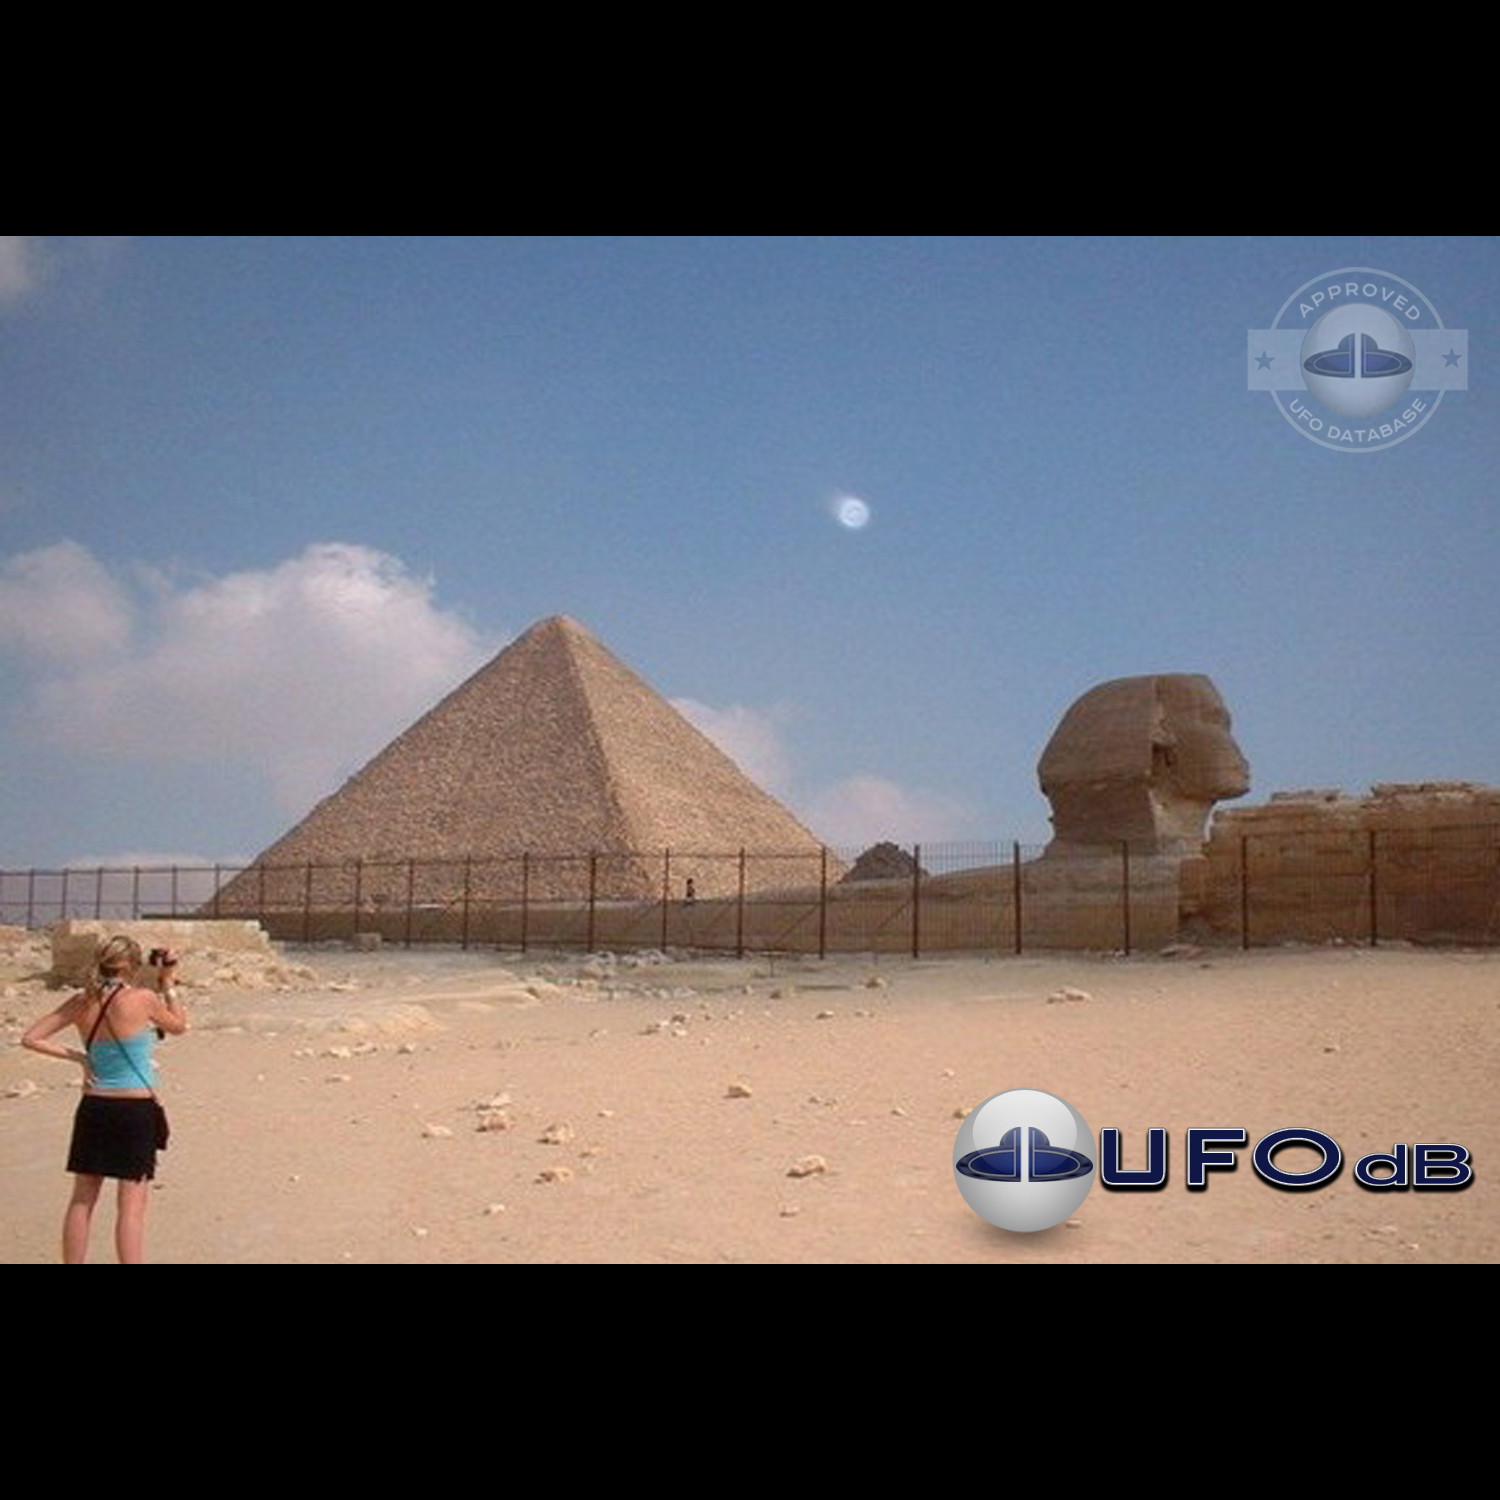 UFO picture near the famous Great Sphinx of Giza by a tourist | Egypt UFO Picture #143-1